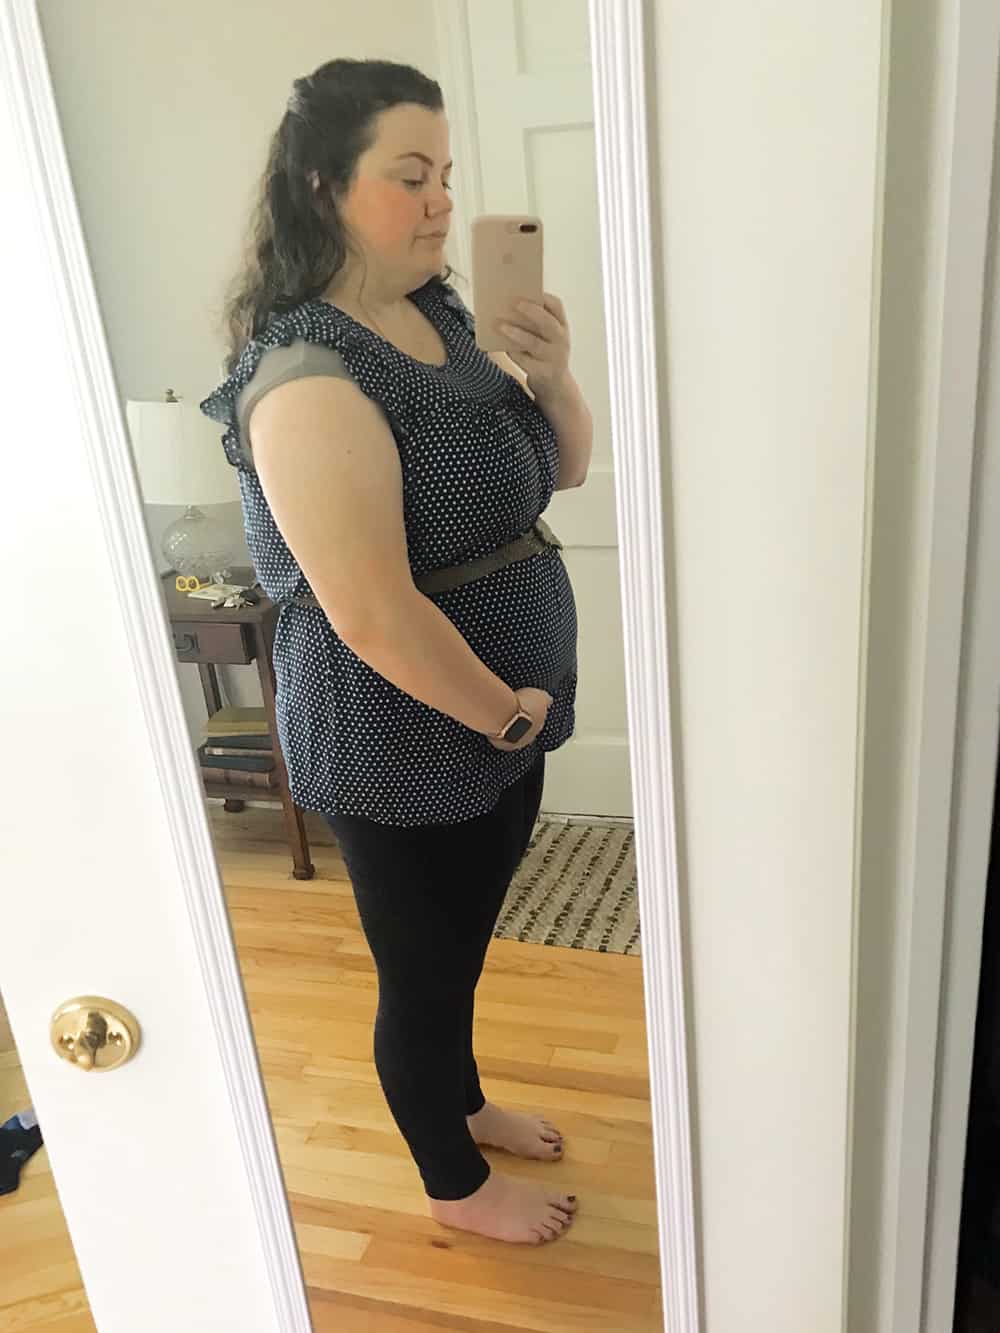 Pregnancy Diaries: My First Trimester - LivvyLand